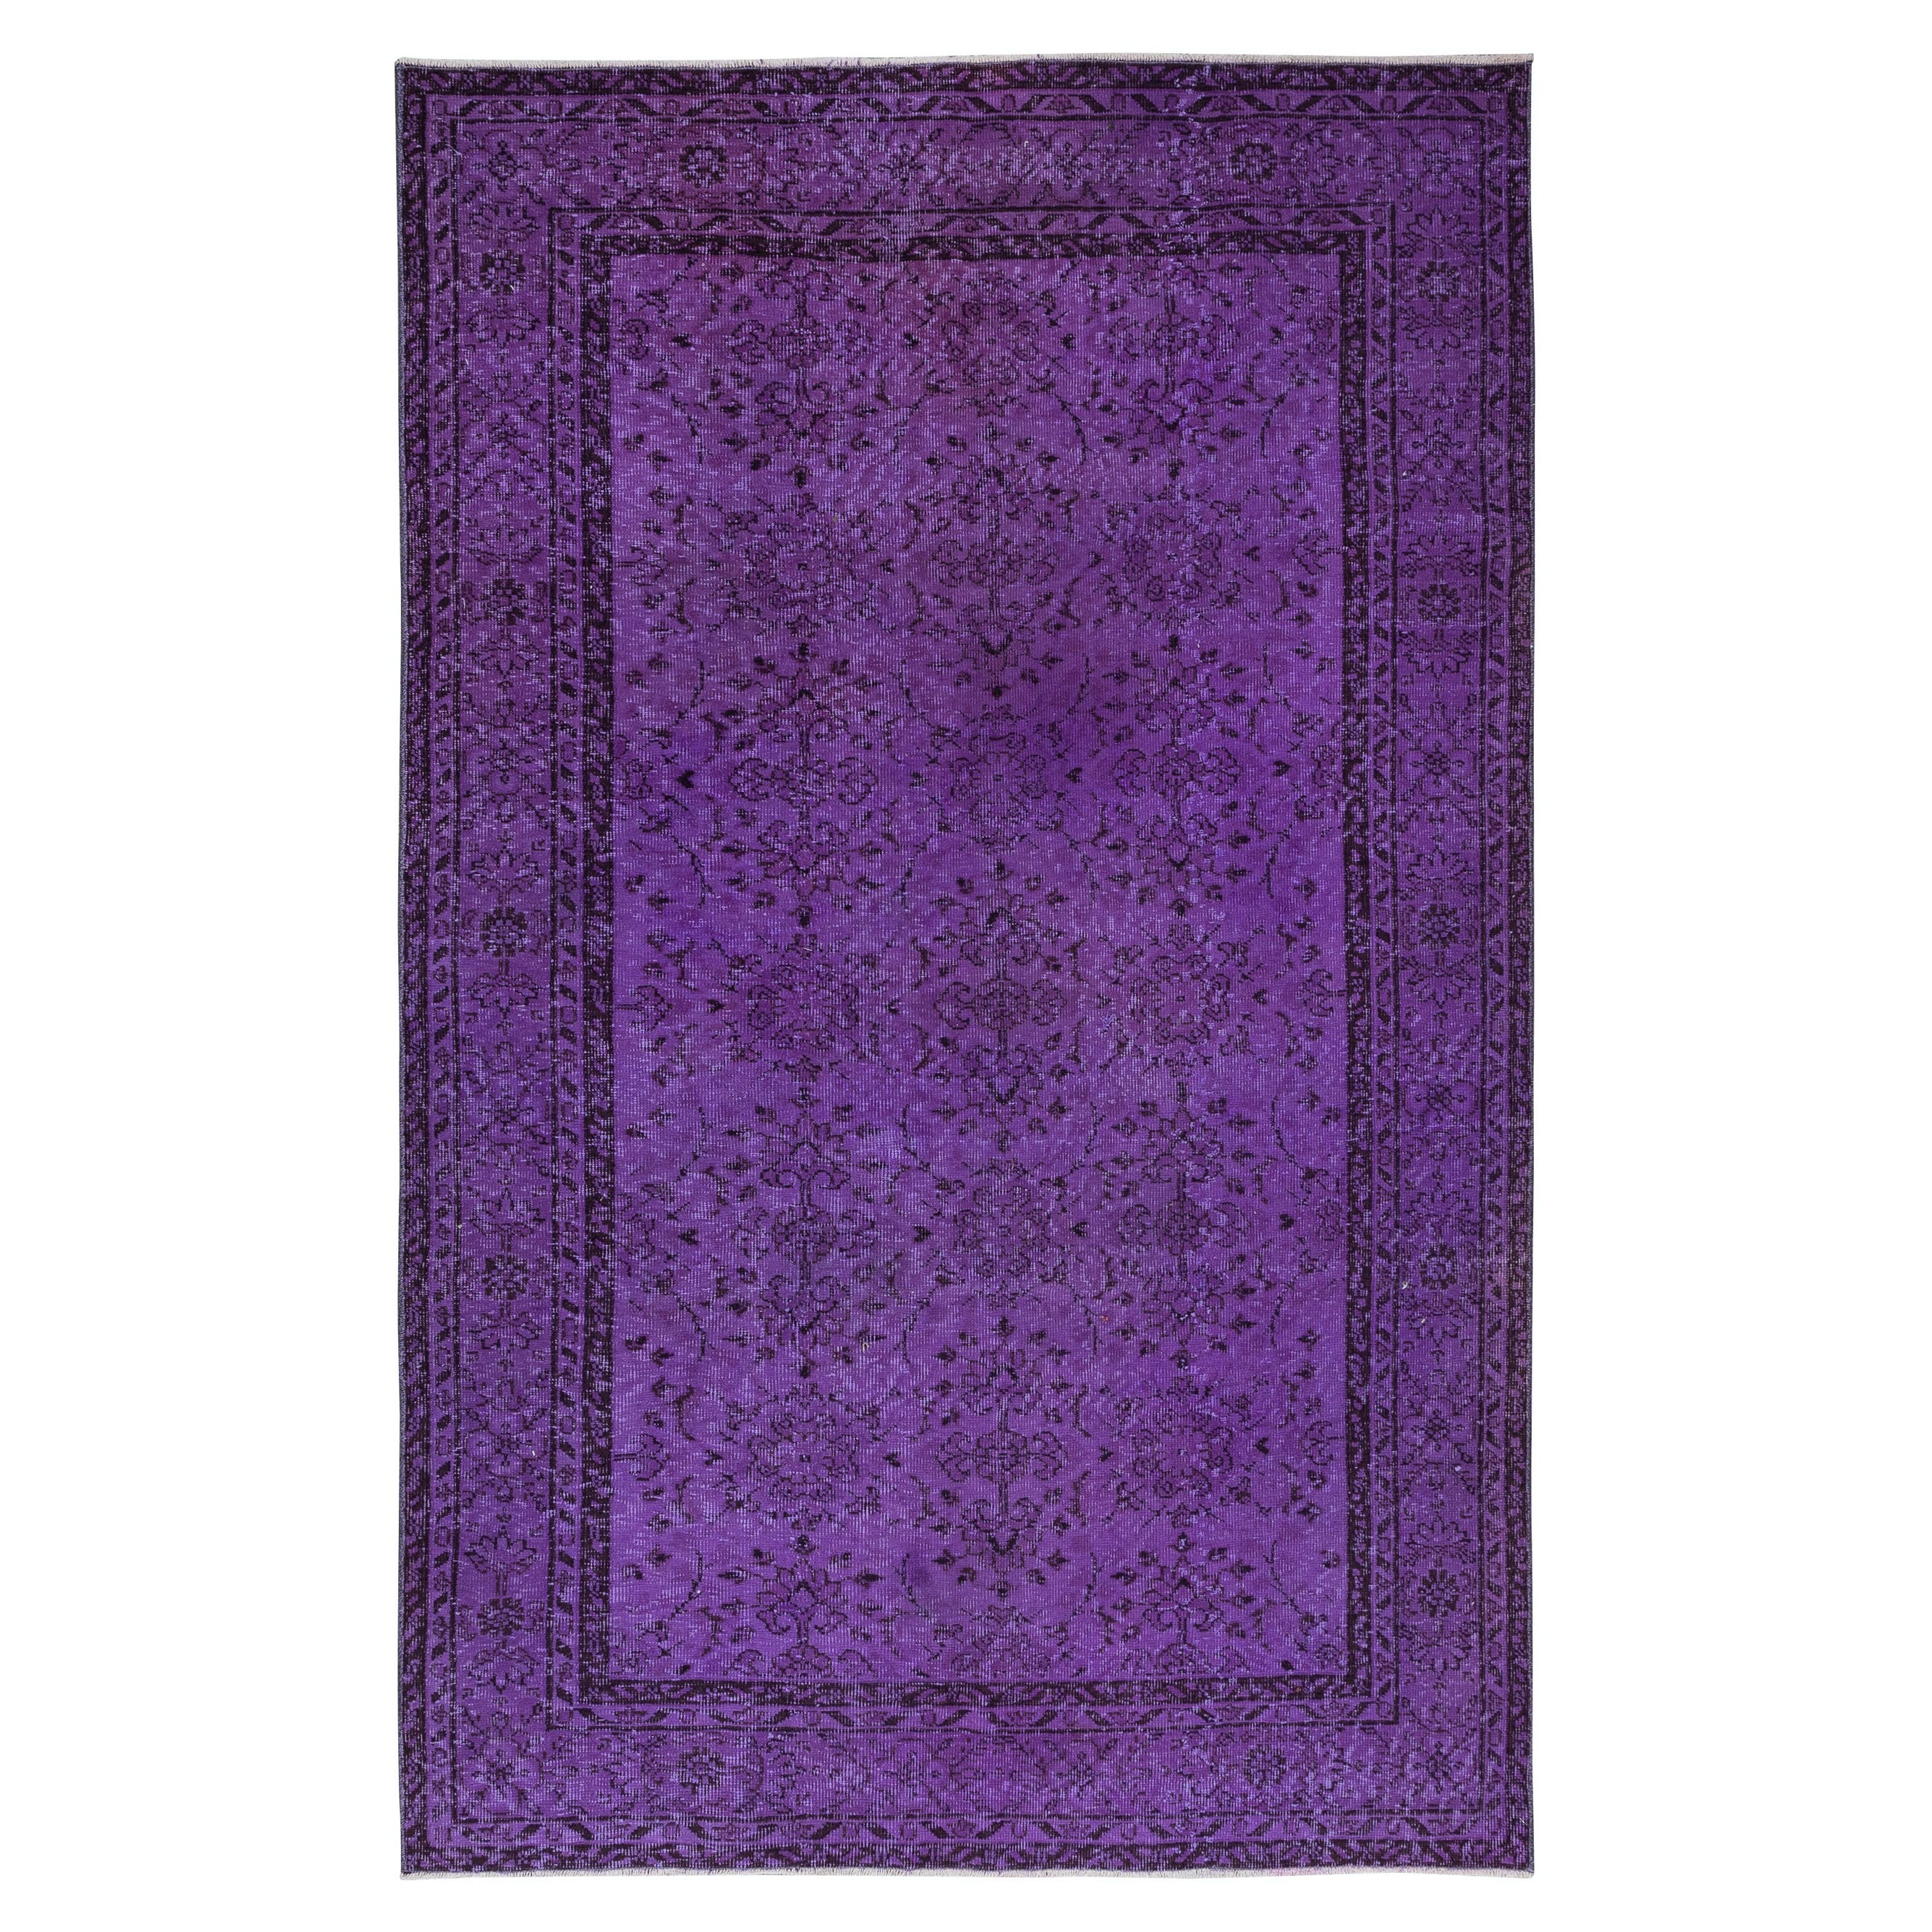 5.6x8.6 Ft Modern Hand Knotted Violet Purple Area Rug from Isparta, Turkey